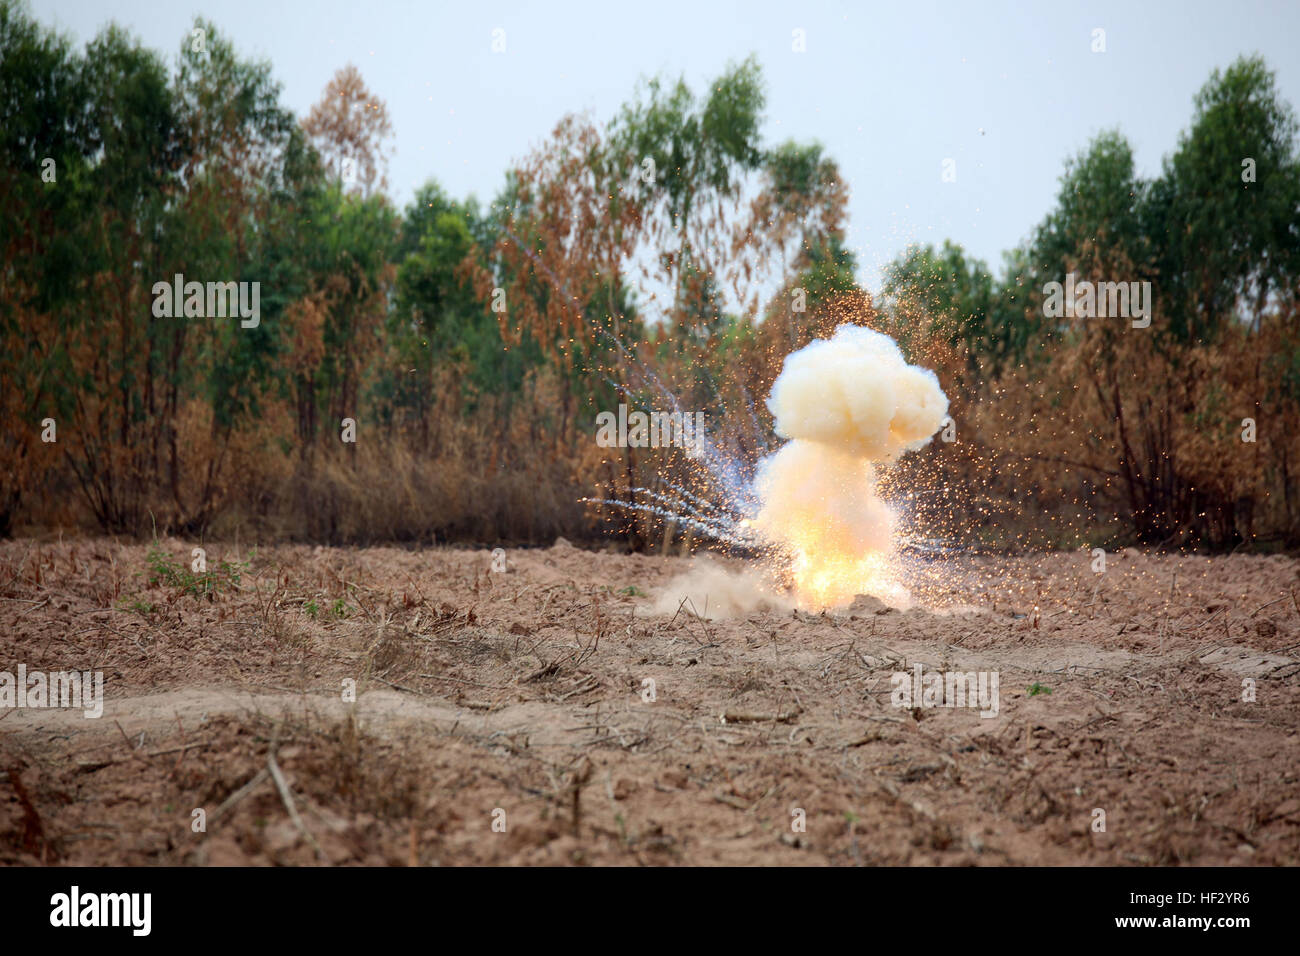 Unexploded ordnance is detonated by Royal Thai Air Force and U.S. Marine explosive ordnance disposal technicians during Exercise Cobra Gold 2015, Feb. The U.S. Marine EOD shared tactics and procedures on how to properly dispose unexploded ordnance to the RTAF. Exercise Cobra Gold demonstrates the commitment of the Kingdom of Thailand and the United States to our long-standing alliance and regional partnership to advance prosperity and security in the Asia-Pacific region. For more information on exercise Cobra Gold, please visit the official Facebook page at http://www.facebook.com/ExerciseCobr Stock Photo